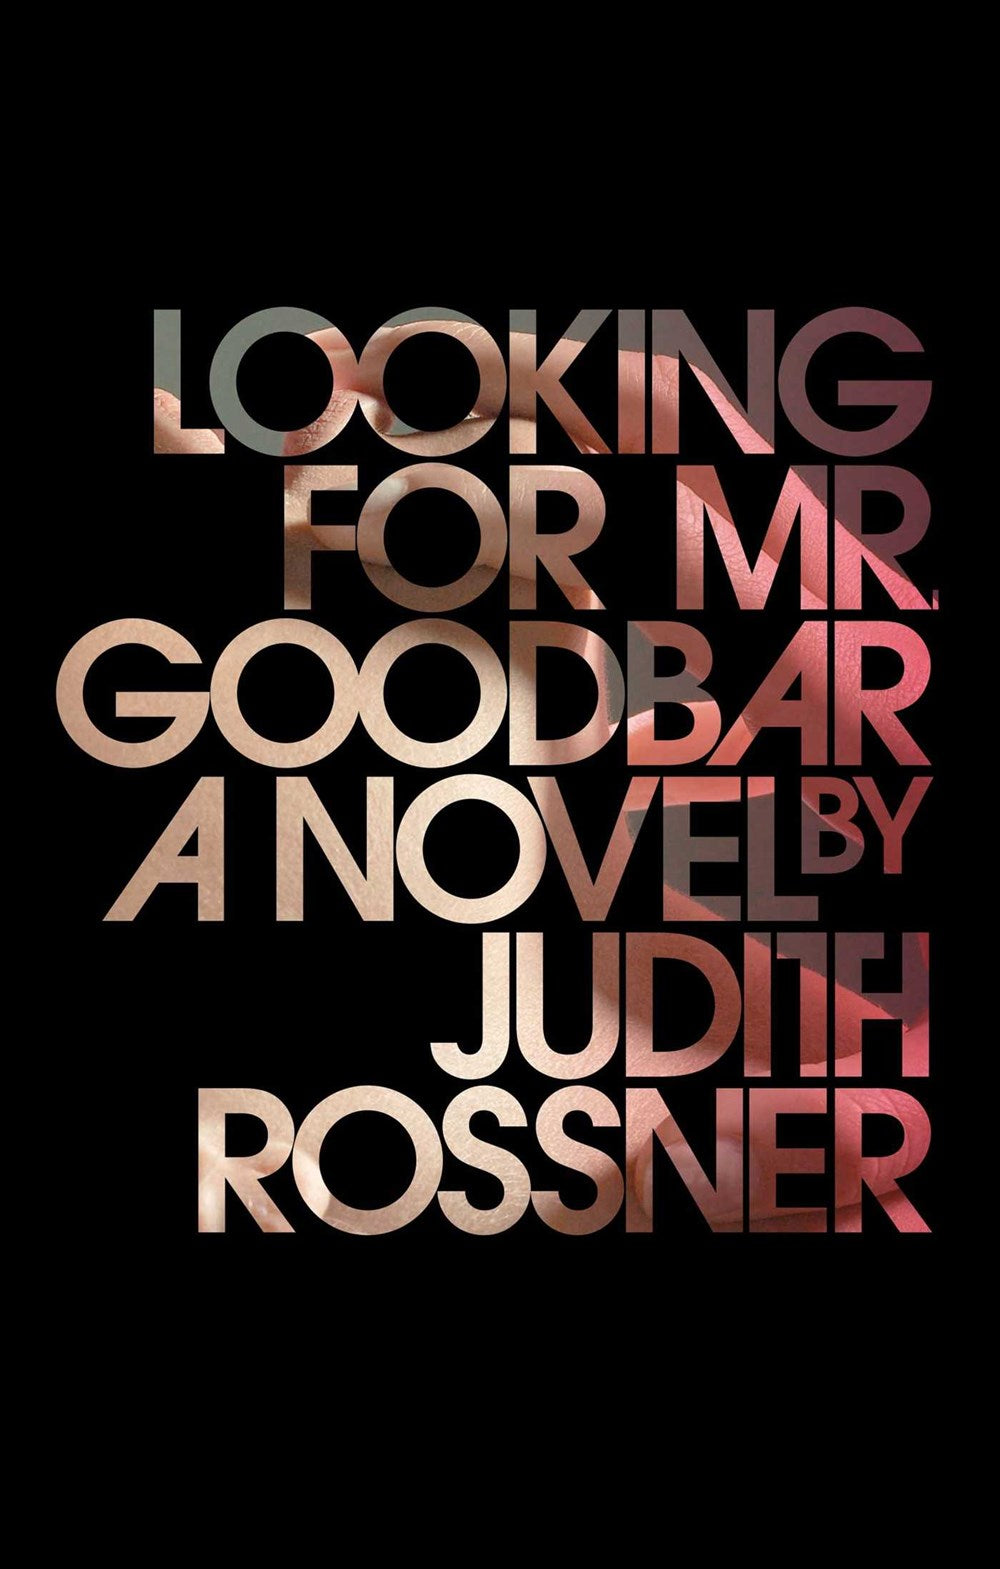 Looking for Mr. Goodbar: A Novel by Judith Rossner